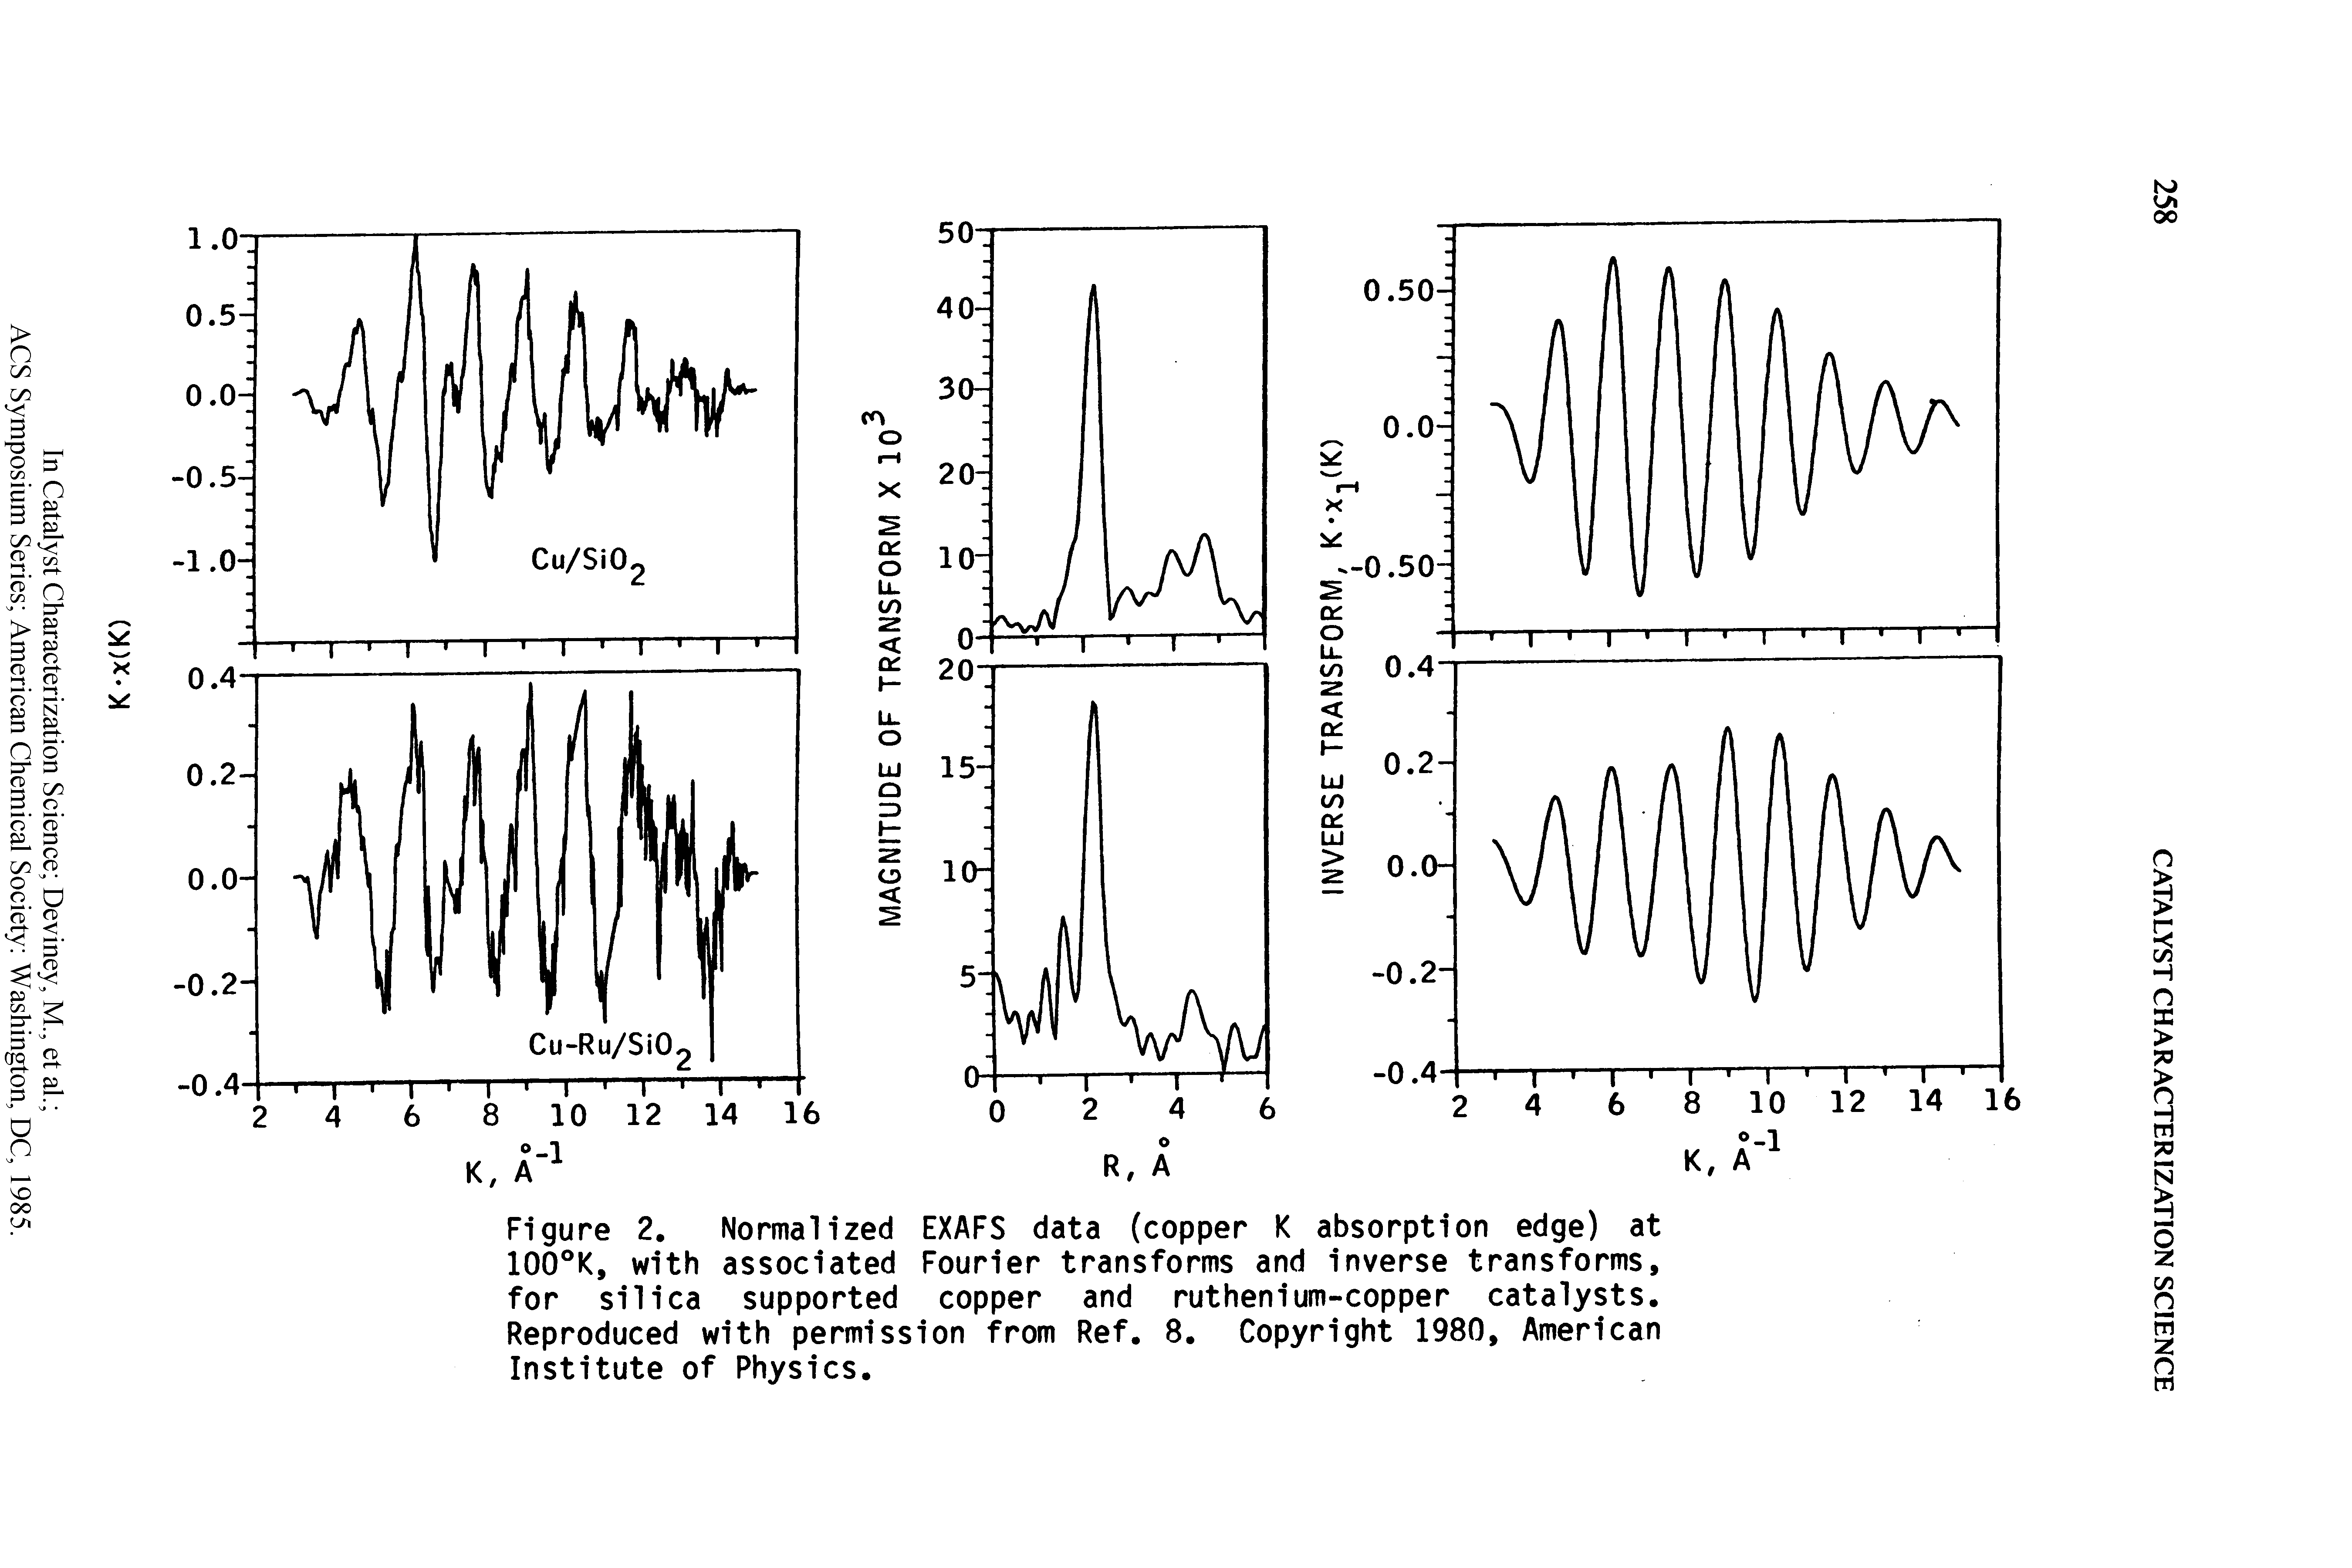 Figure 2. Normalized EXAFS data (copper K absorption edge) at 100°K, with associated Fourier transforms and inverse transforms, for silica supported copper and ruthenium-copper catalysts. Reproduced with permission from Ref. 8. Copyright 1980, American Institute of Physics.